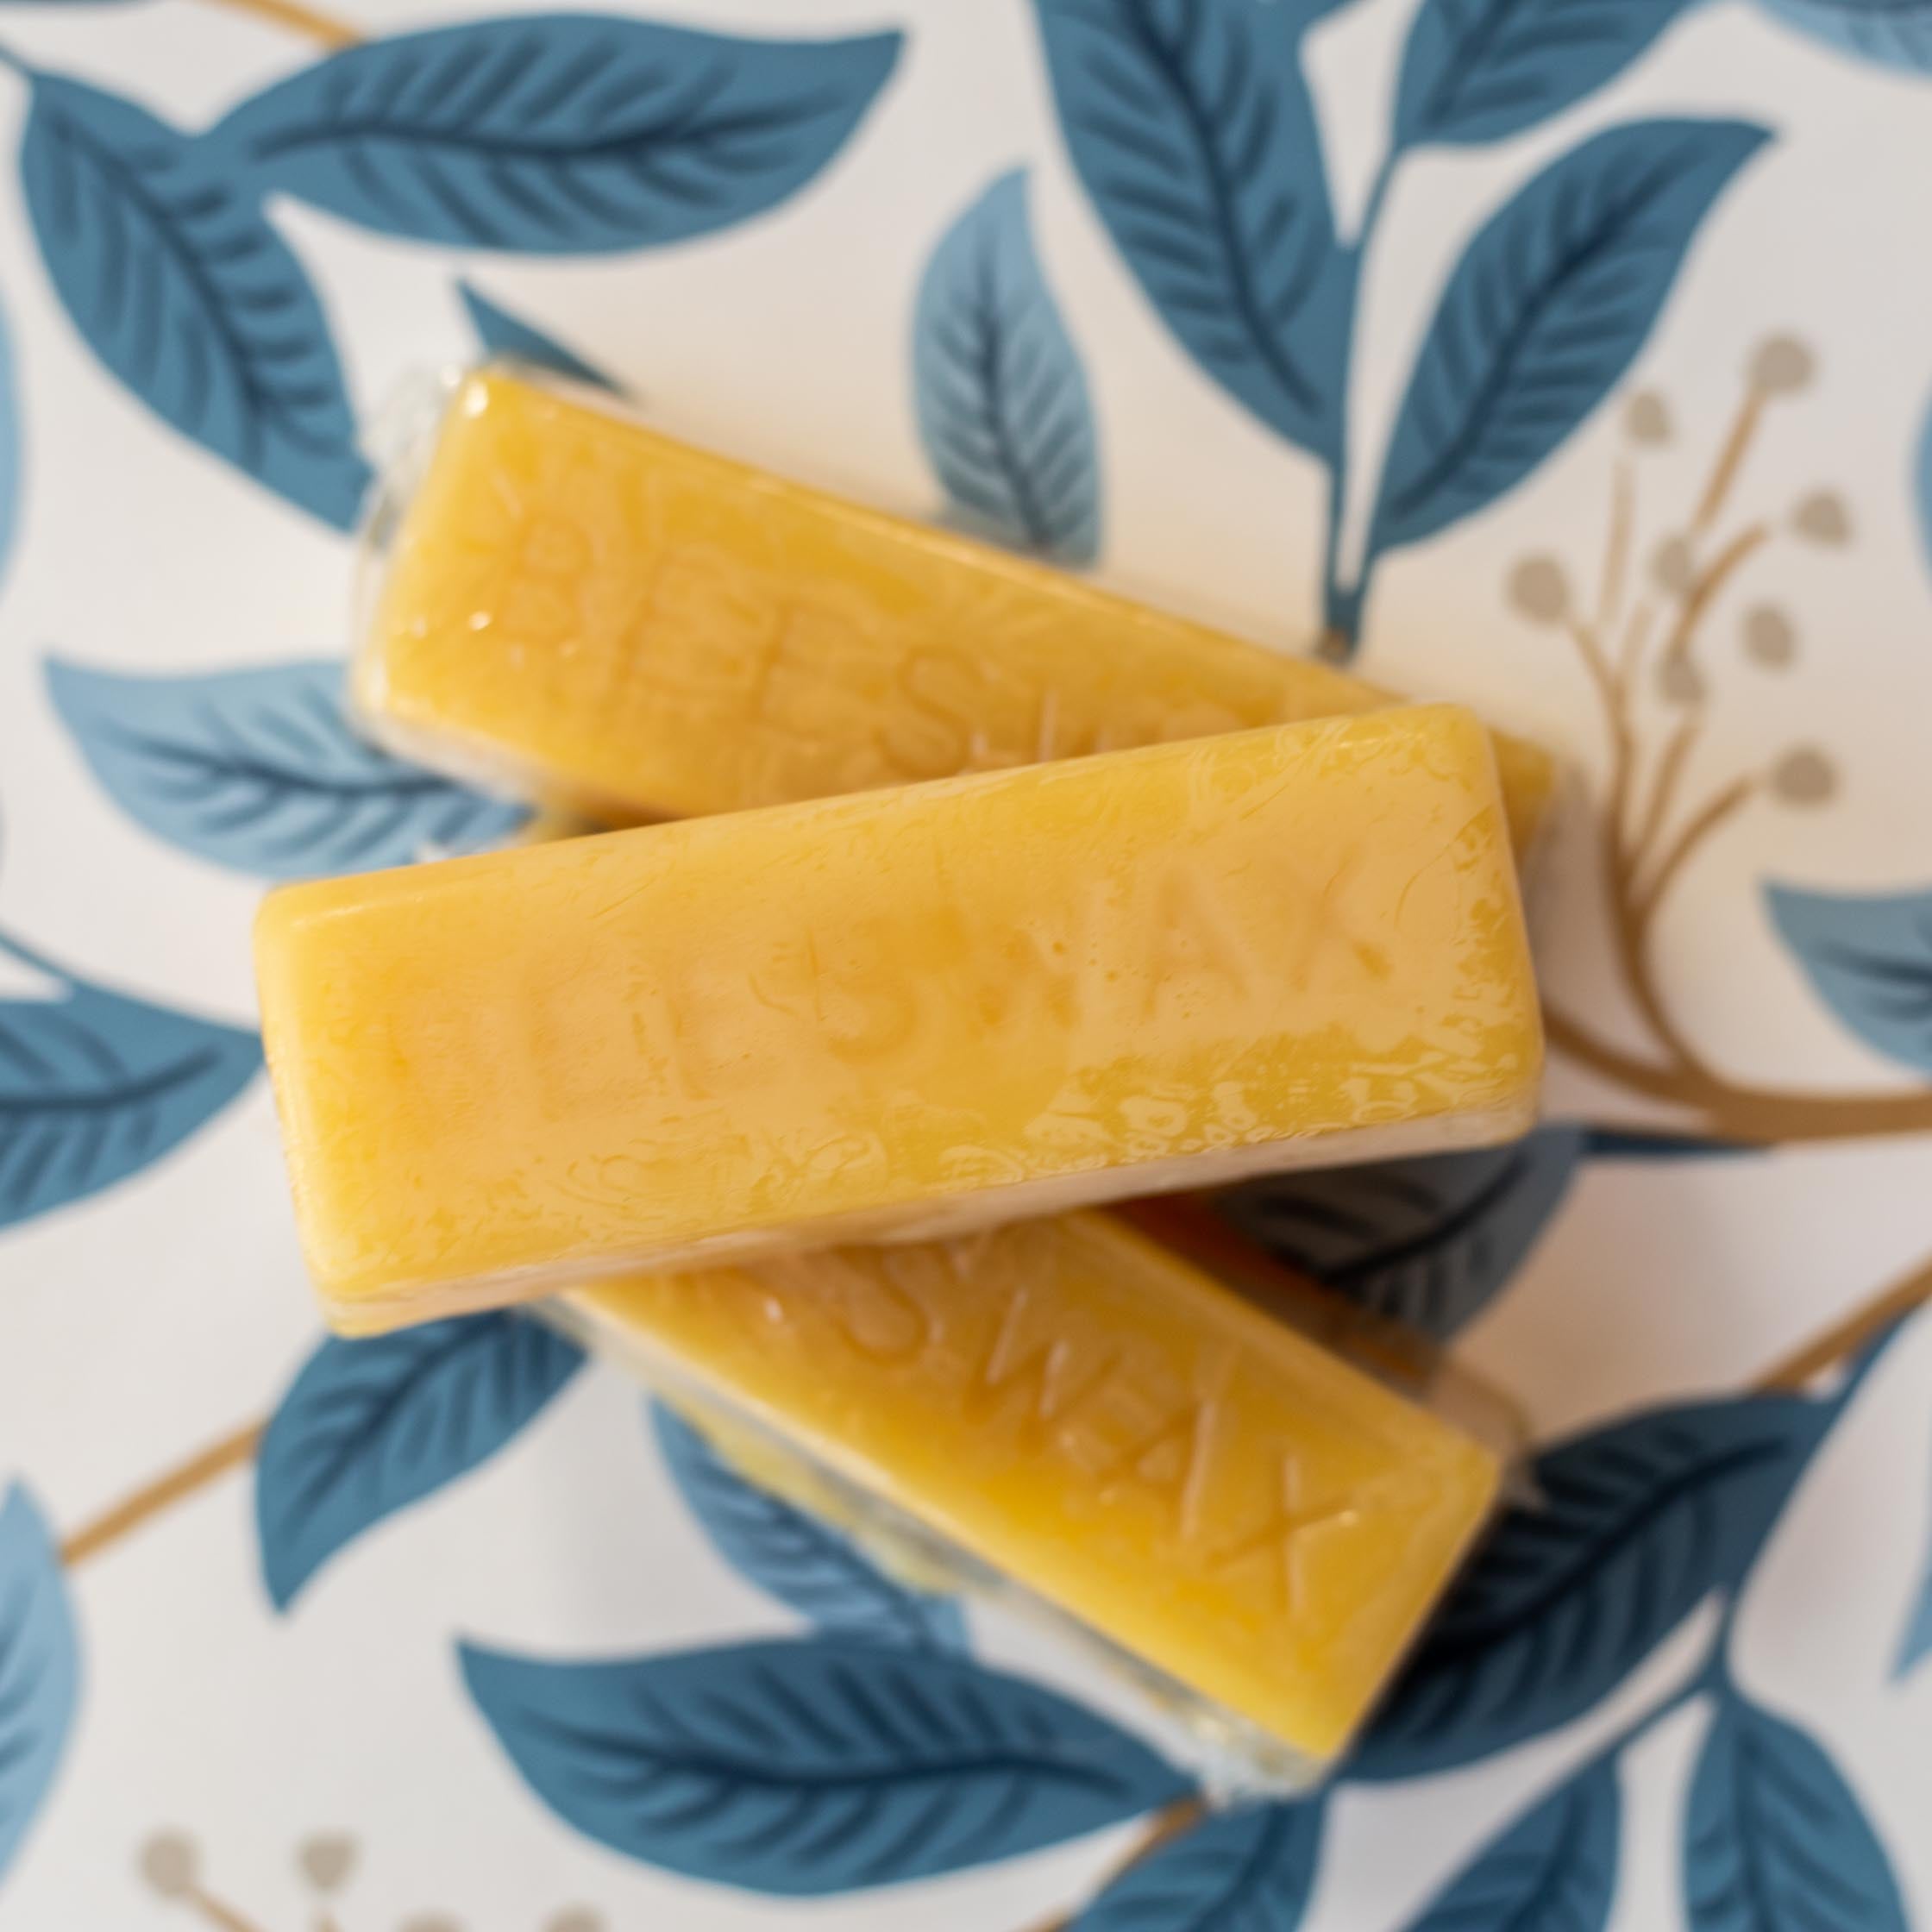 Handcrafted Beeswax Shampoo Bar – South Mountain Bees